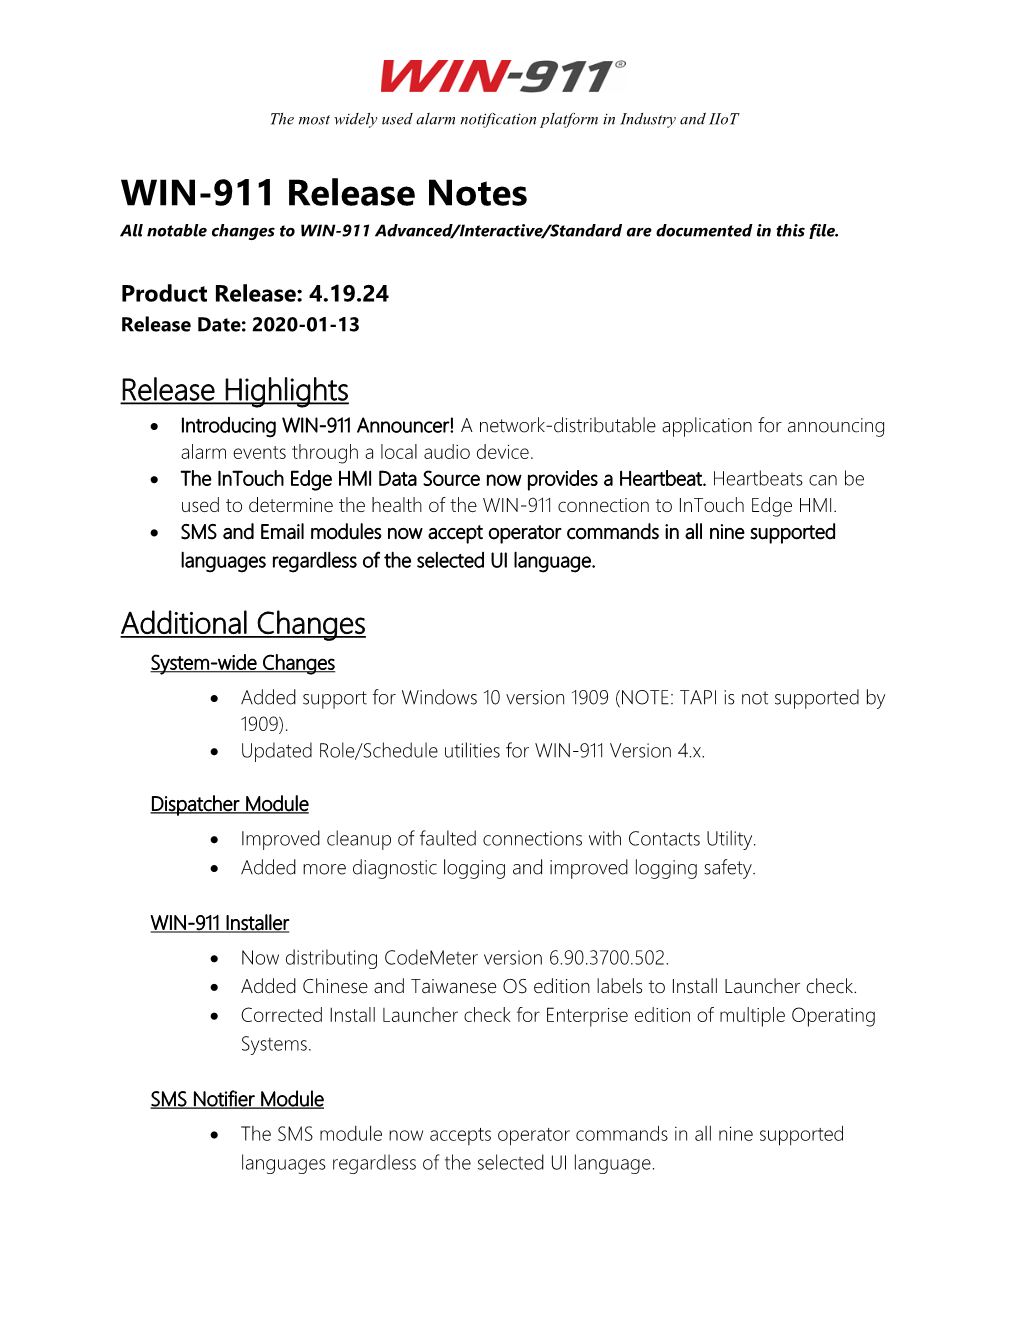 WIN-911 Release Notes All Notable Changes to WIN-911 Advanced/Interactive/Standard Are Documented in This File